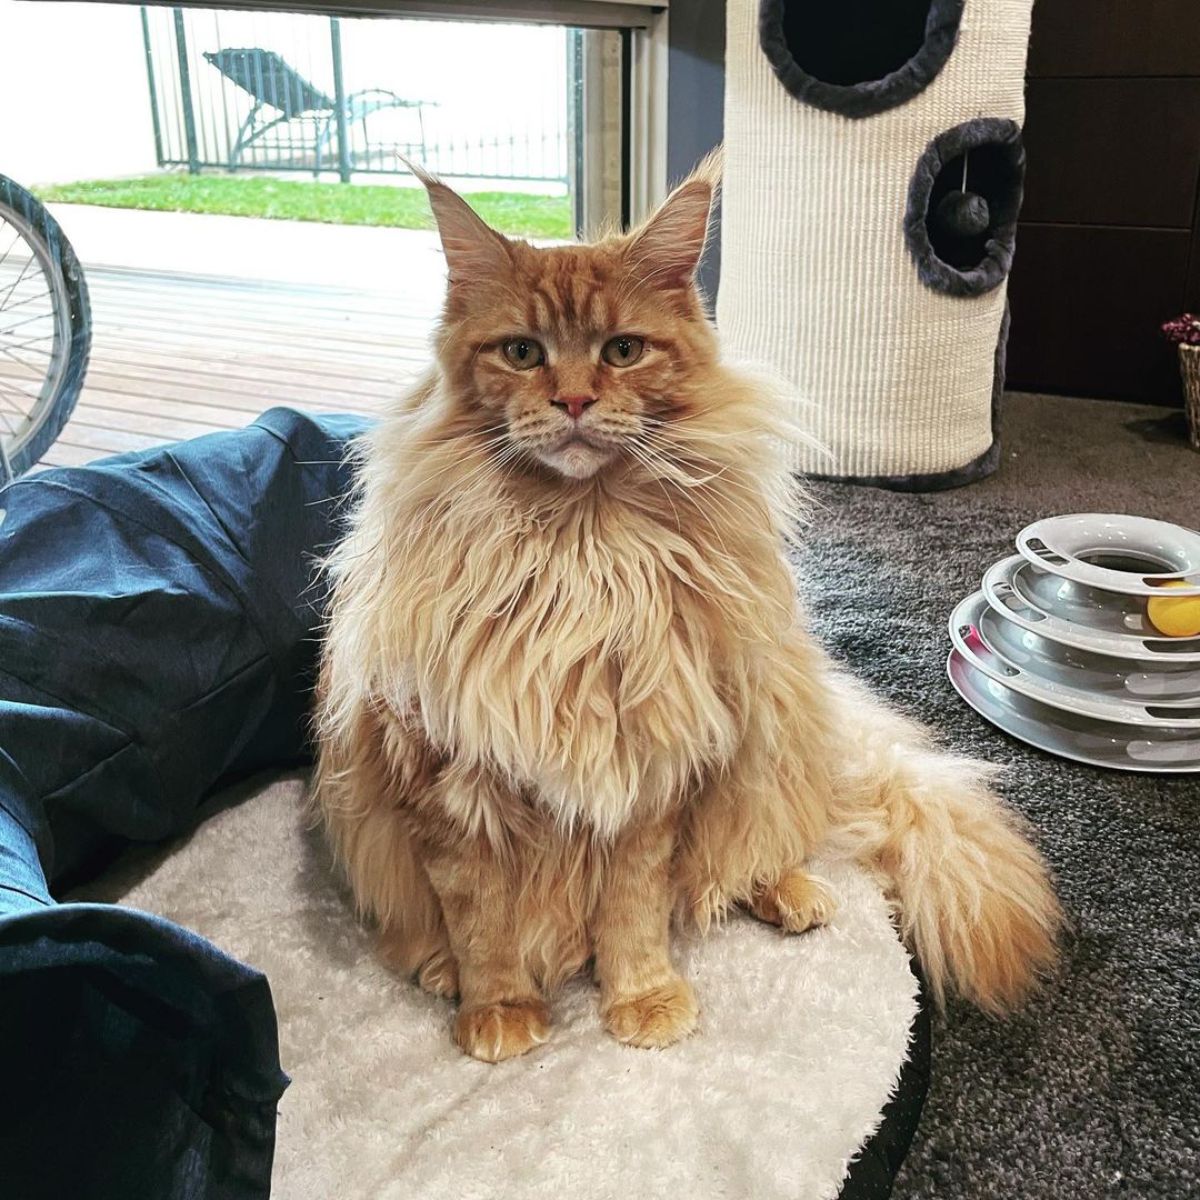 An adorable ginger maine coon with a neck ruff sitting on a cat bed.